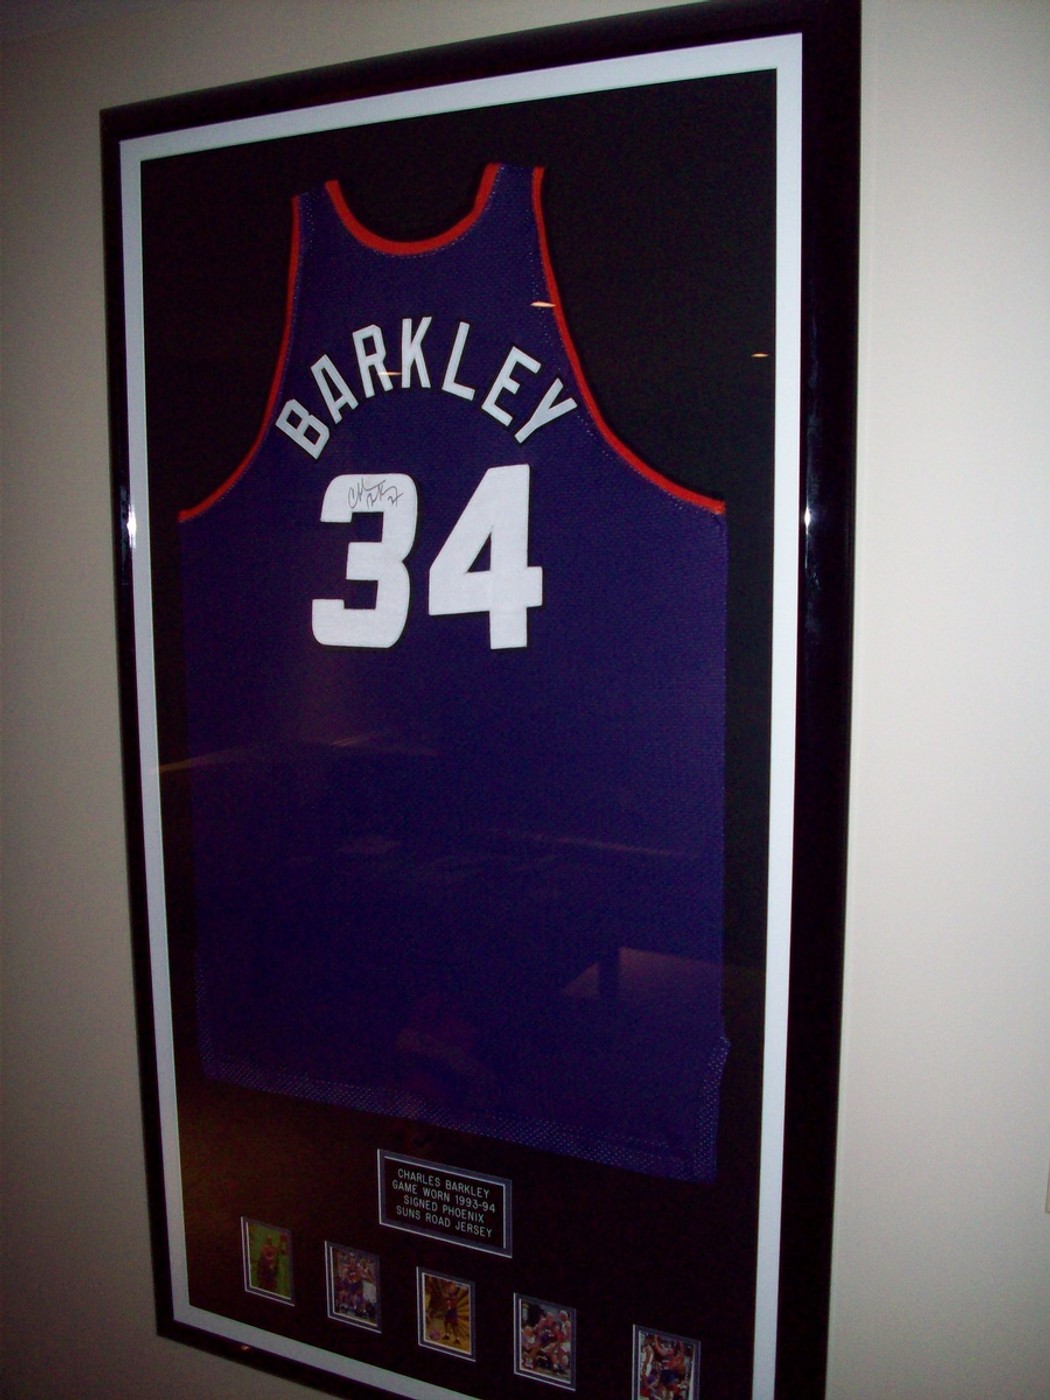 CHARLES BARKLEY NBA PHOENIX GAME WORN AND SIGNED JERSEY Collectionzz